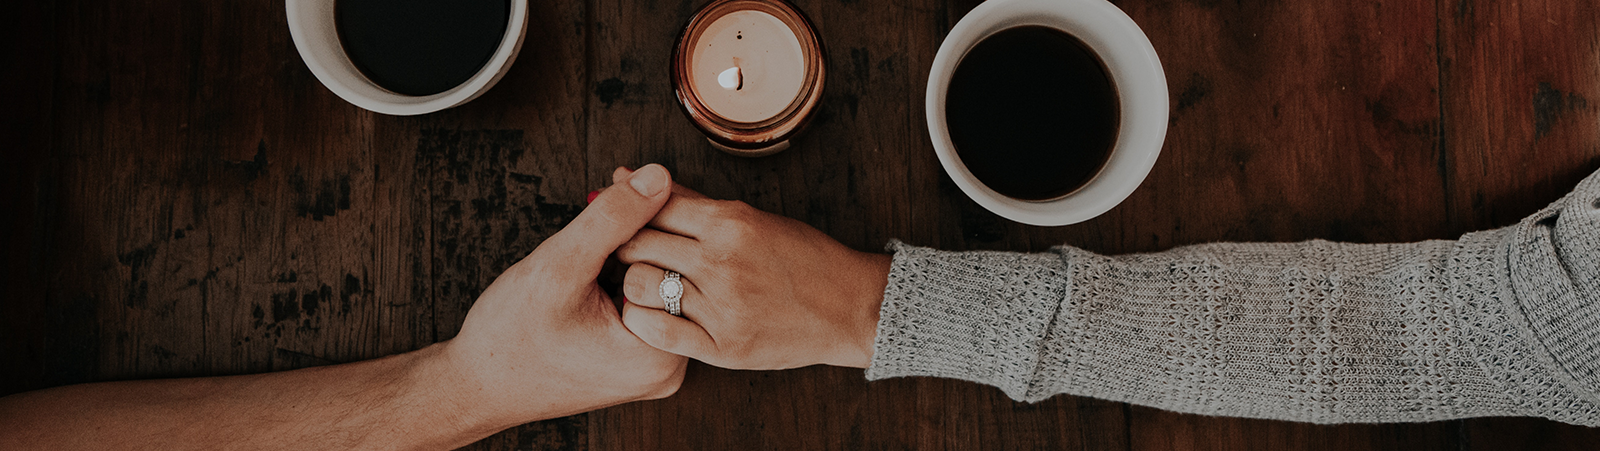 Couples Therapy and Marriage Counseling in Manchester, CT—Get Help to Improve Your Relationship